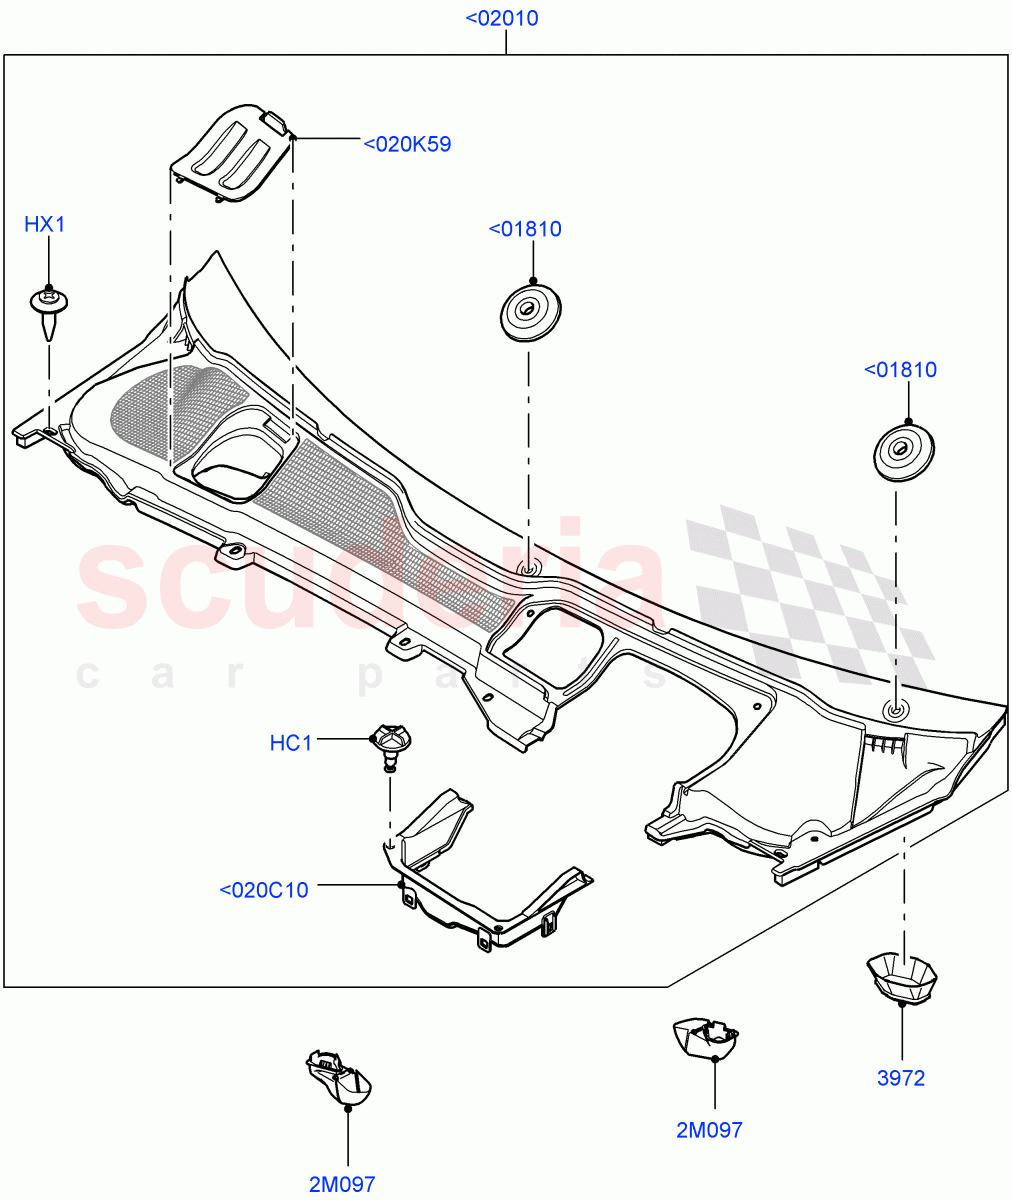 Cowl/Panel And Related Parts(Changsu (China))((V)FROMEG000001) of Land Rover Land Rover Range Rover Evoque (2012-2018) [2.0 Turbo Petrol GTDI]